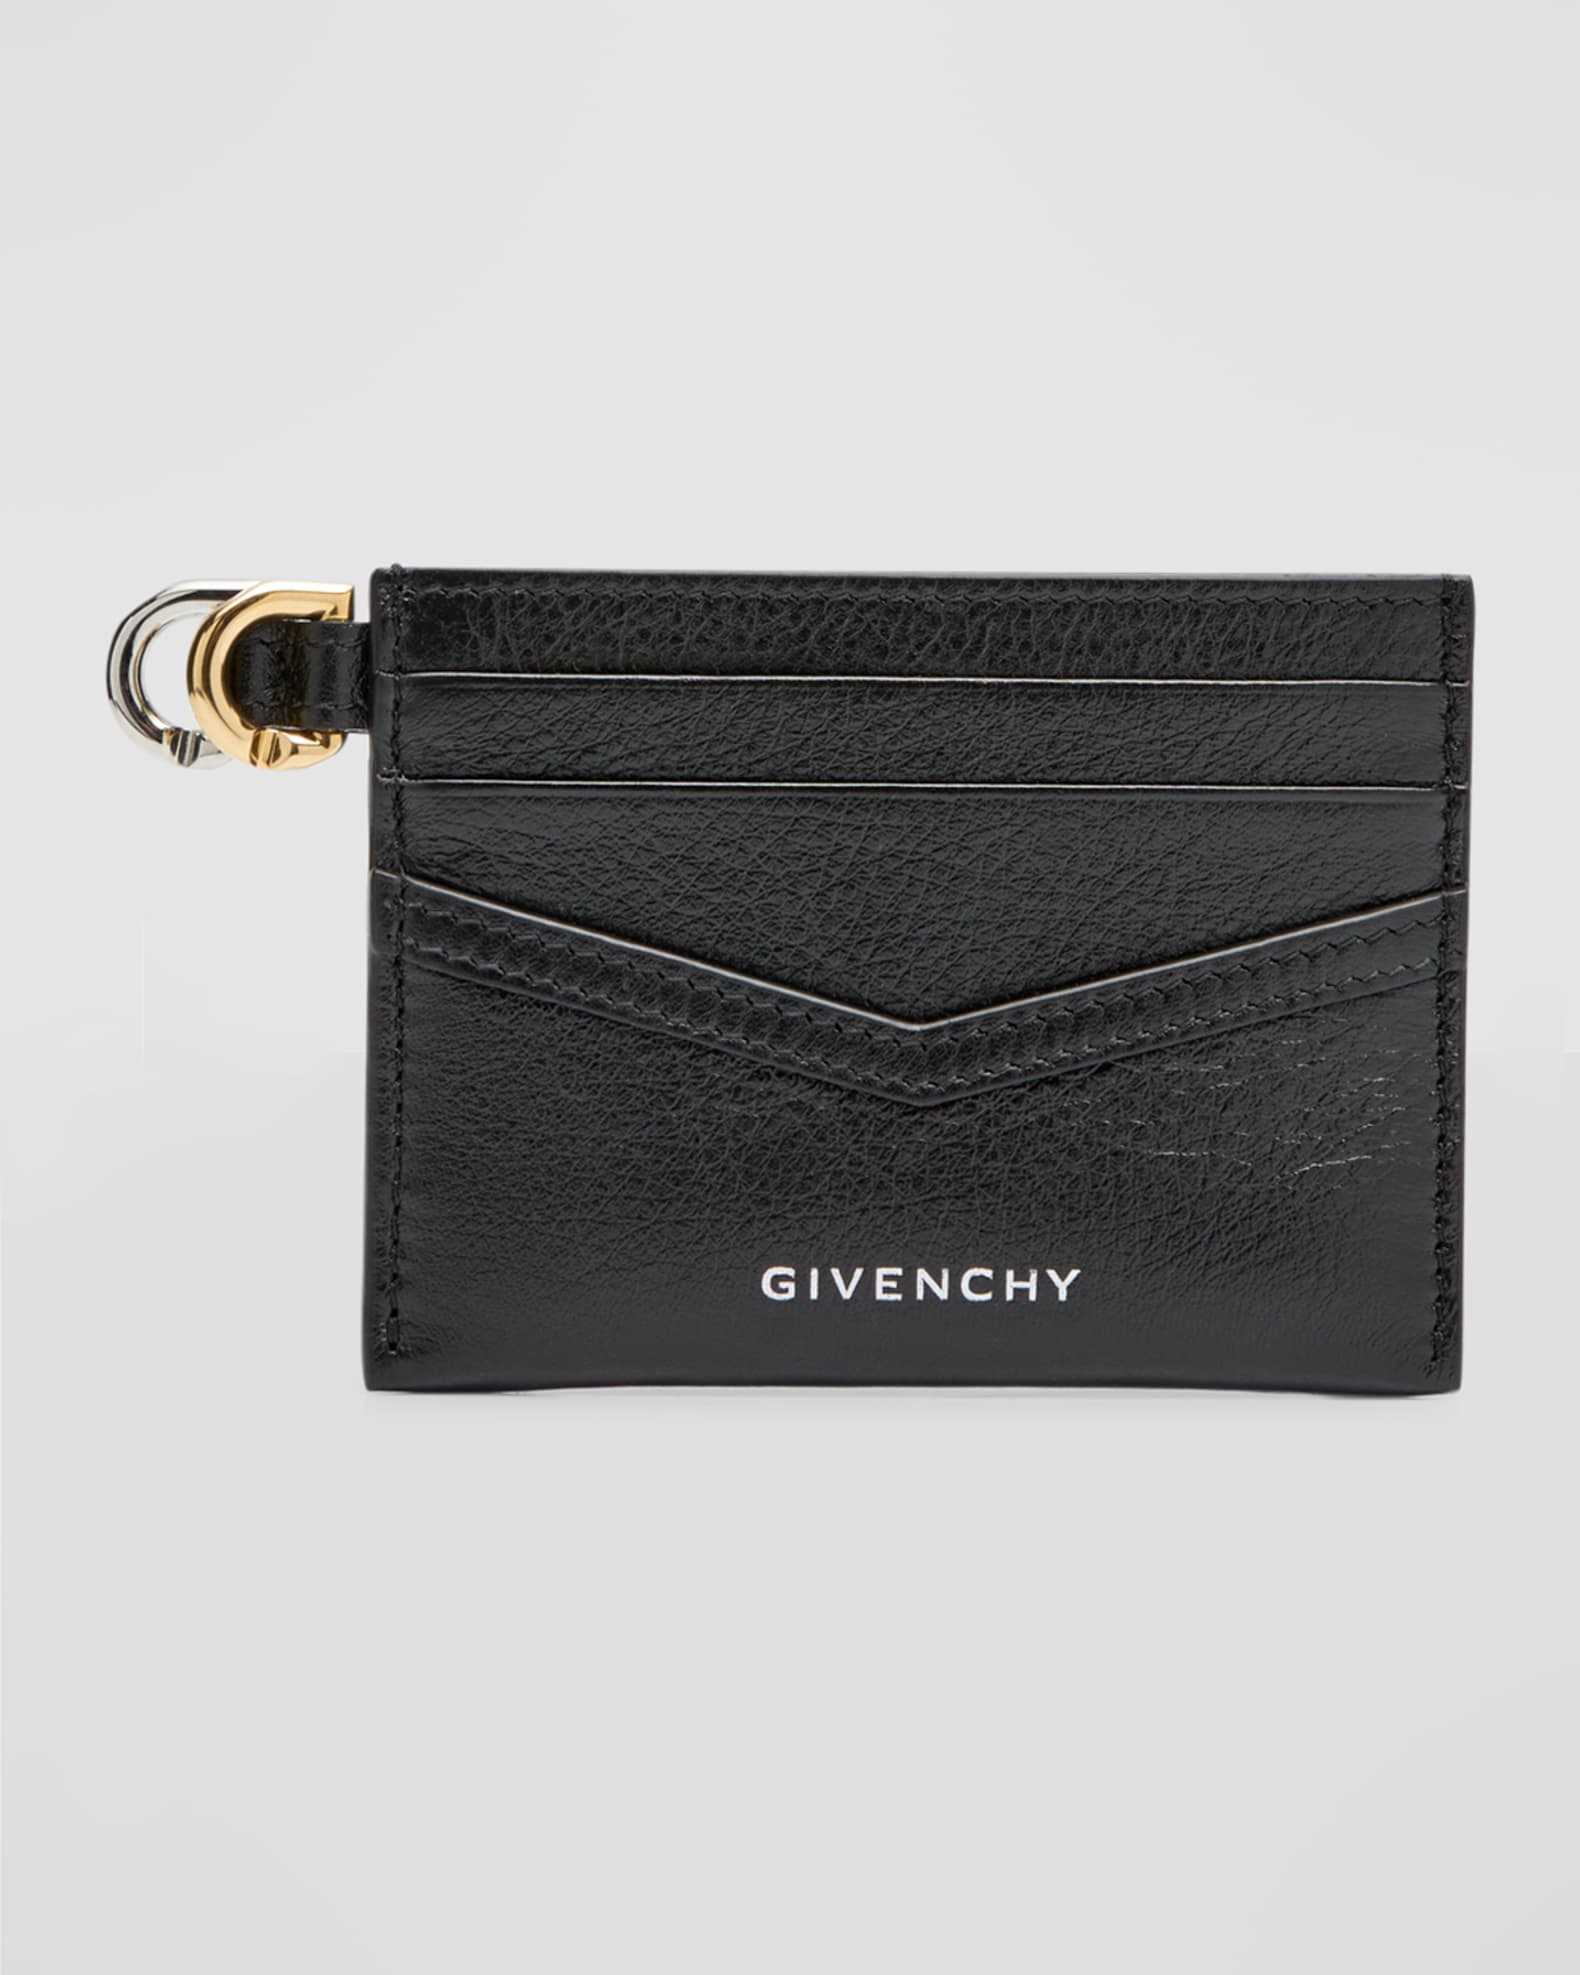 Givenchy Voyou Cardholder in Tumbled Leather | Neiman Marcus